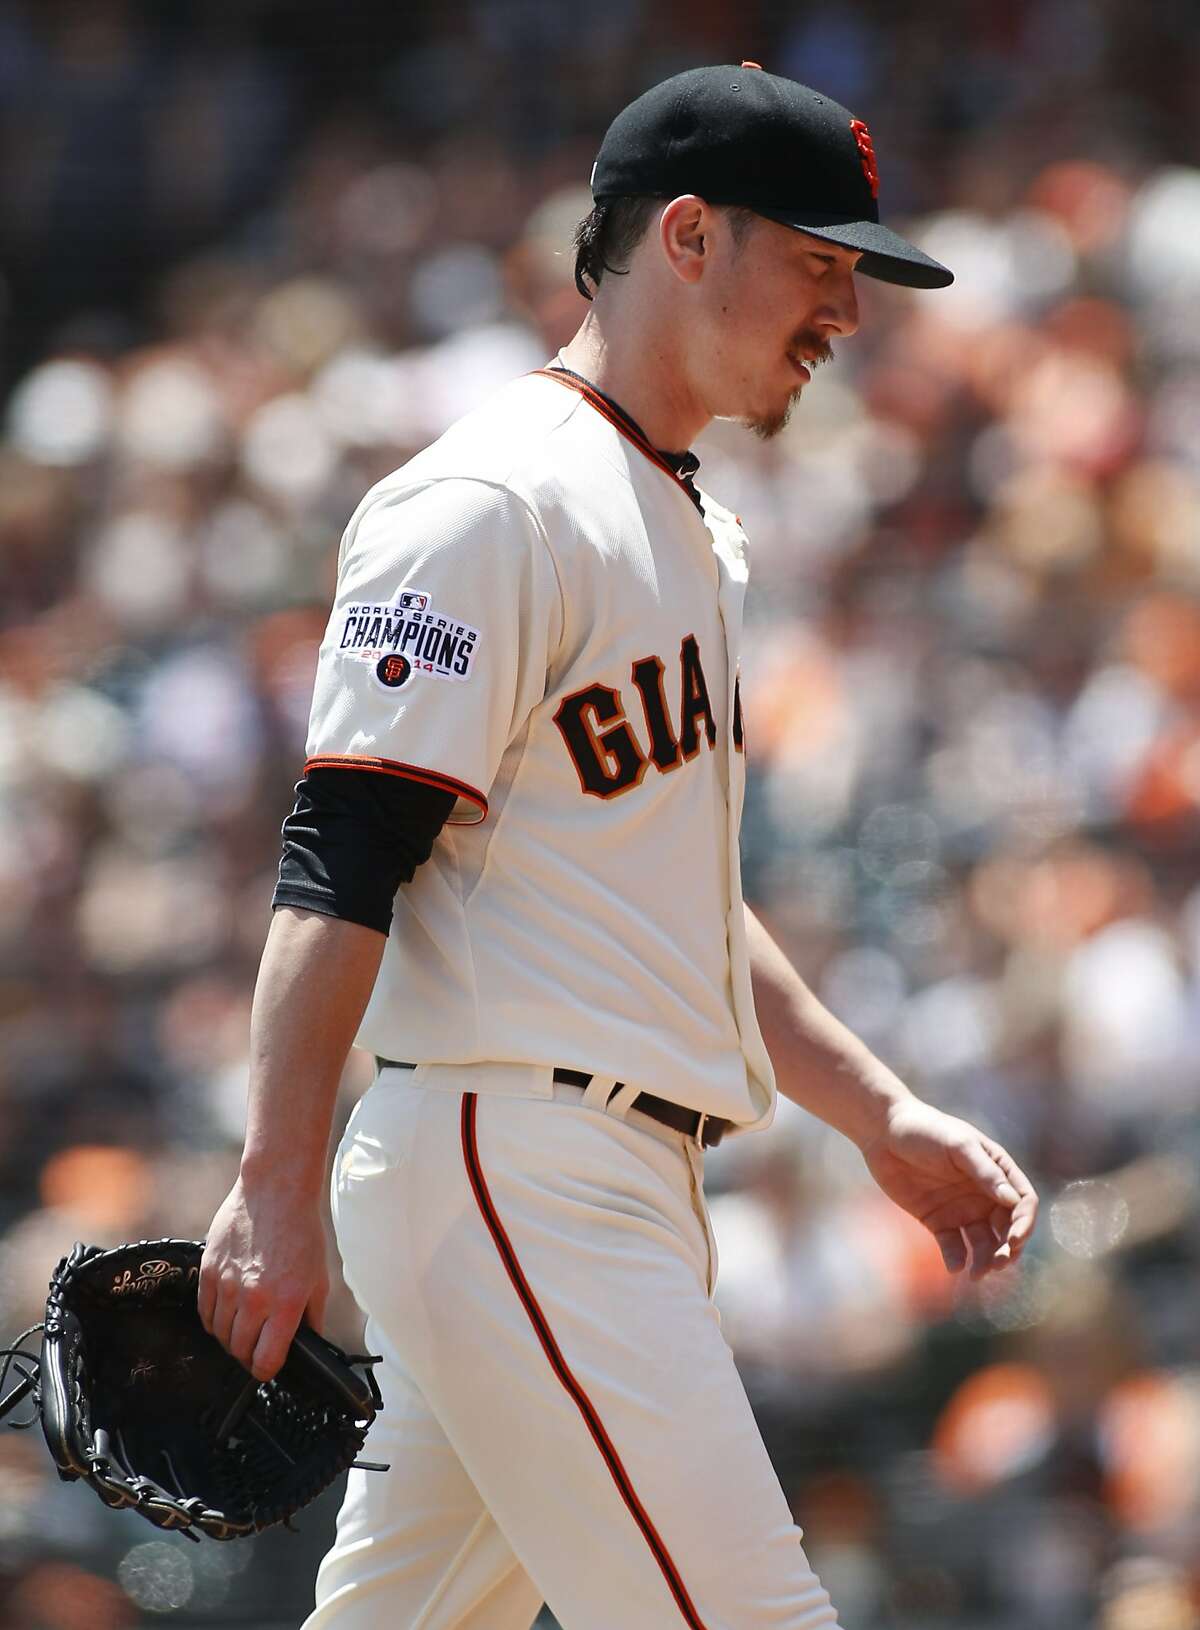 San Francisco Giants pitcher Tim Lincecum walks to the dugout during the first inning of a baseball game, Saturday, June 27, 2015, in San Francisco. (AP Photo/George Nikitin)